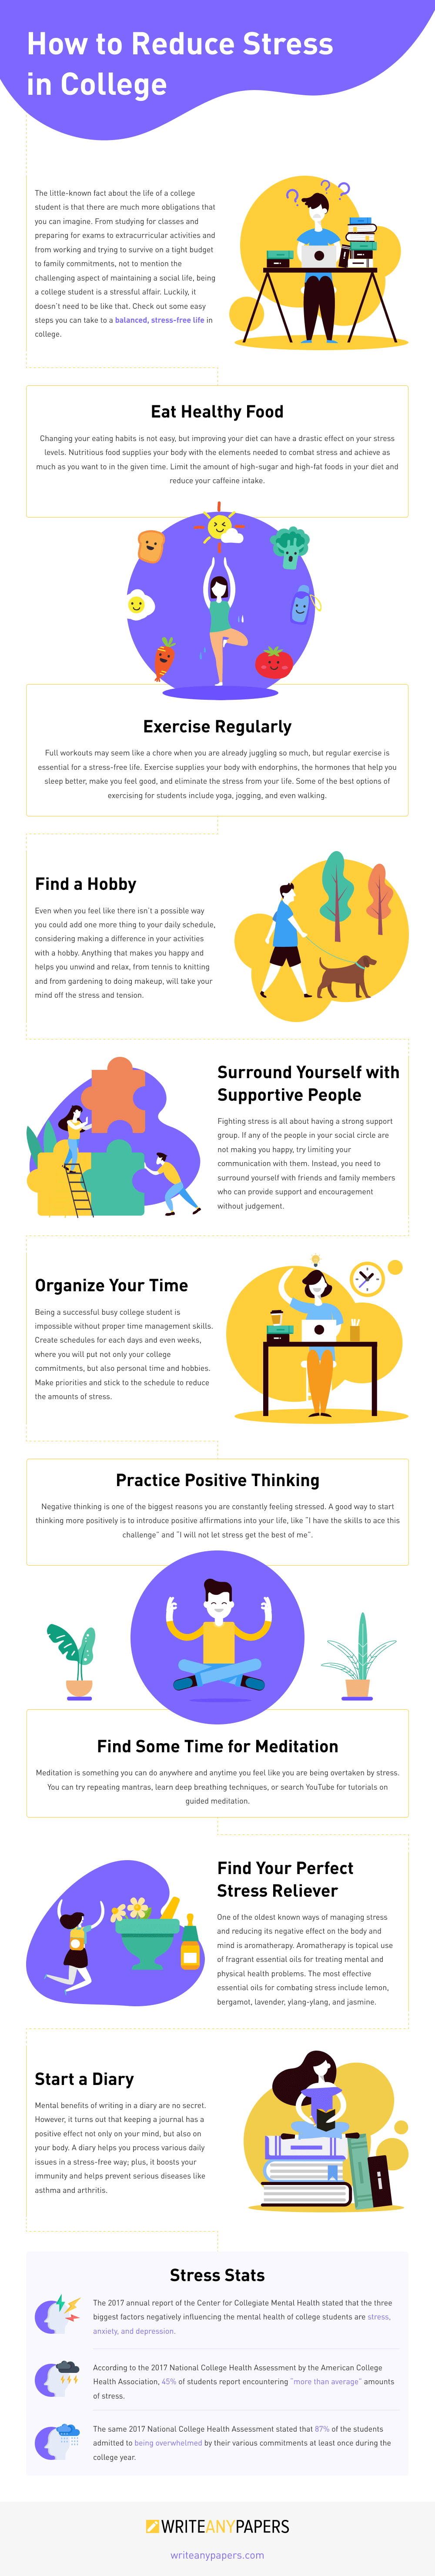 Infographic about ways to reduce stress in college students